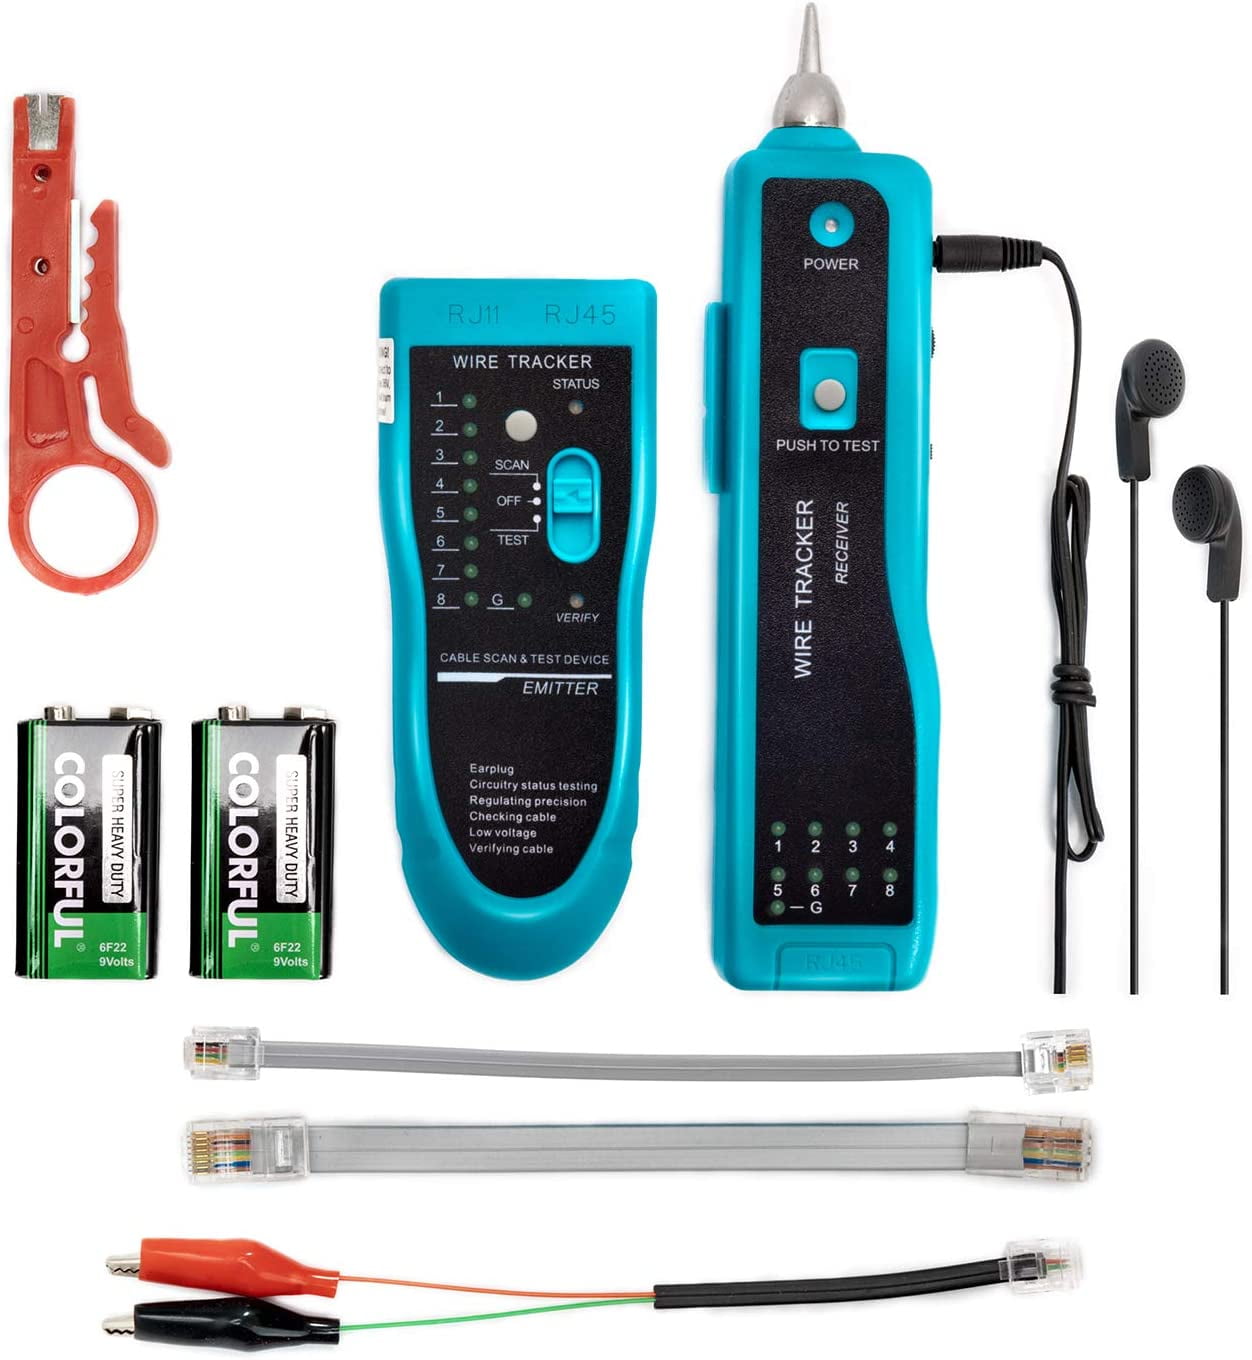 RJ11 Line Finder Cable Tracker Tester Toner Electric Network Wire Tracer Kit